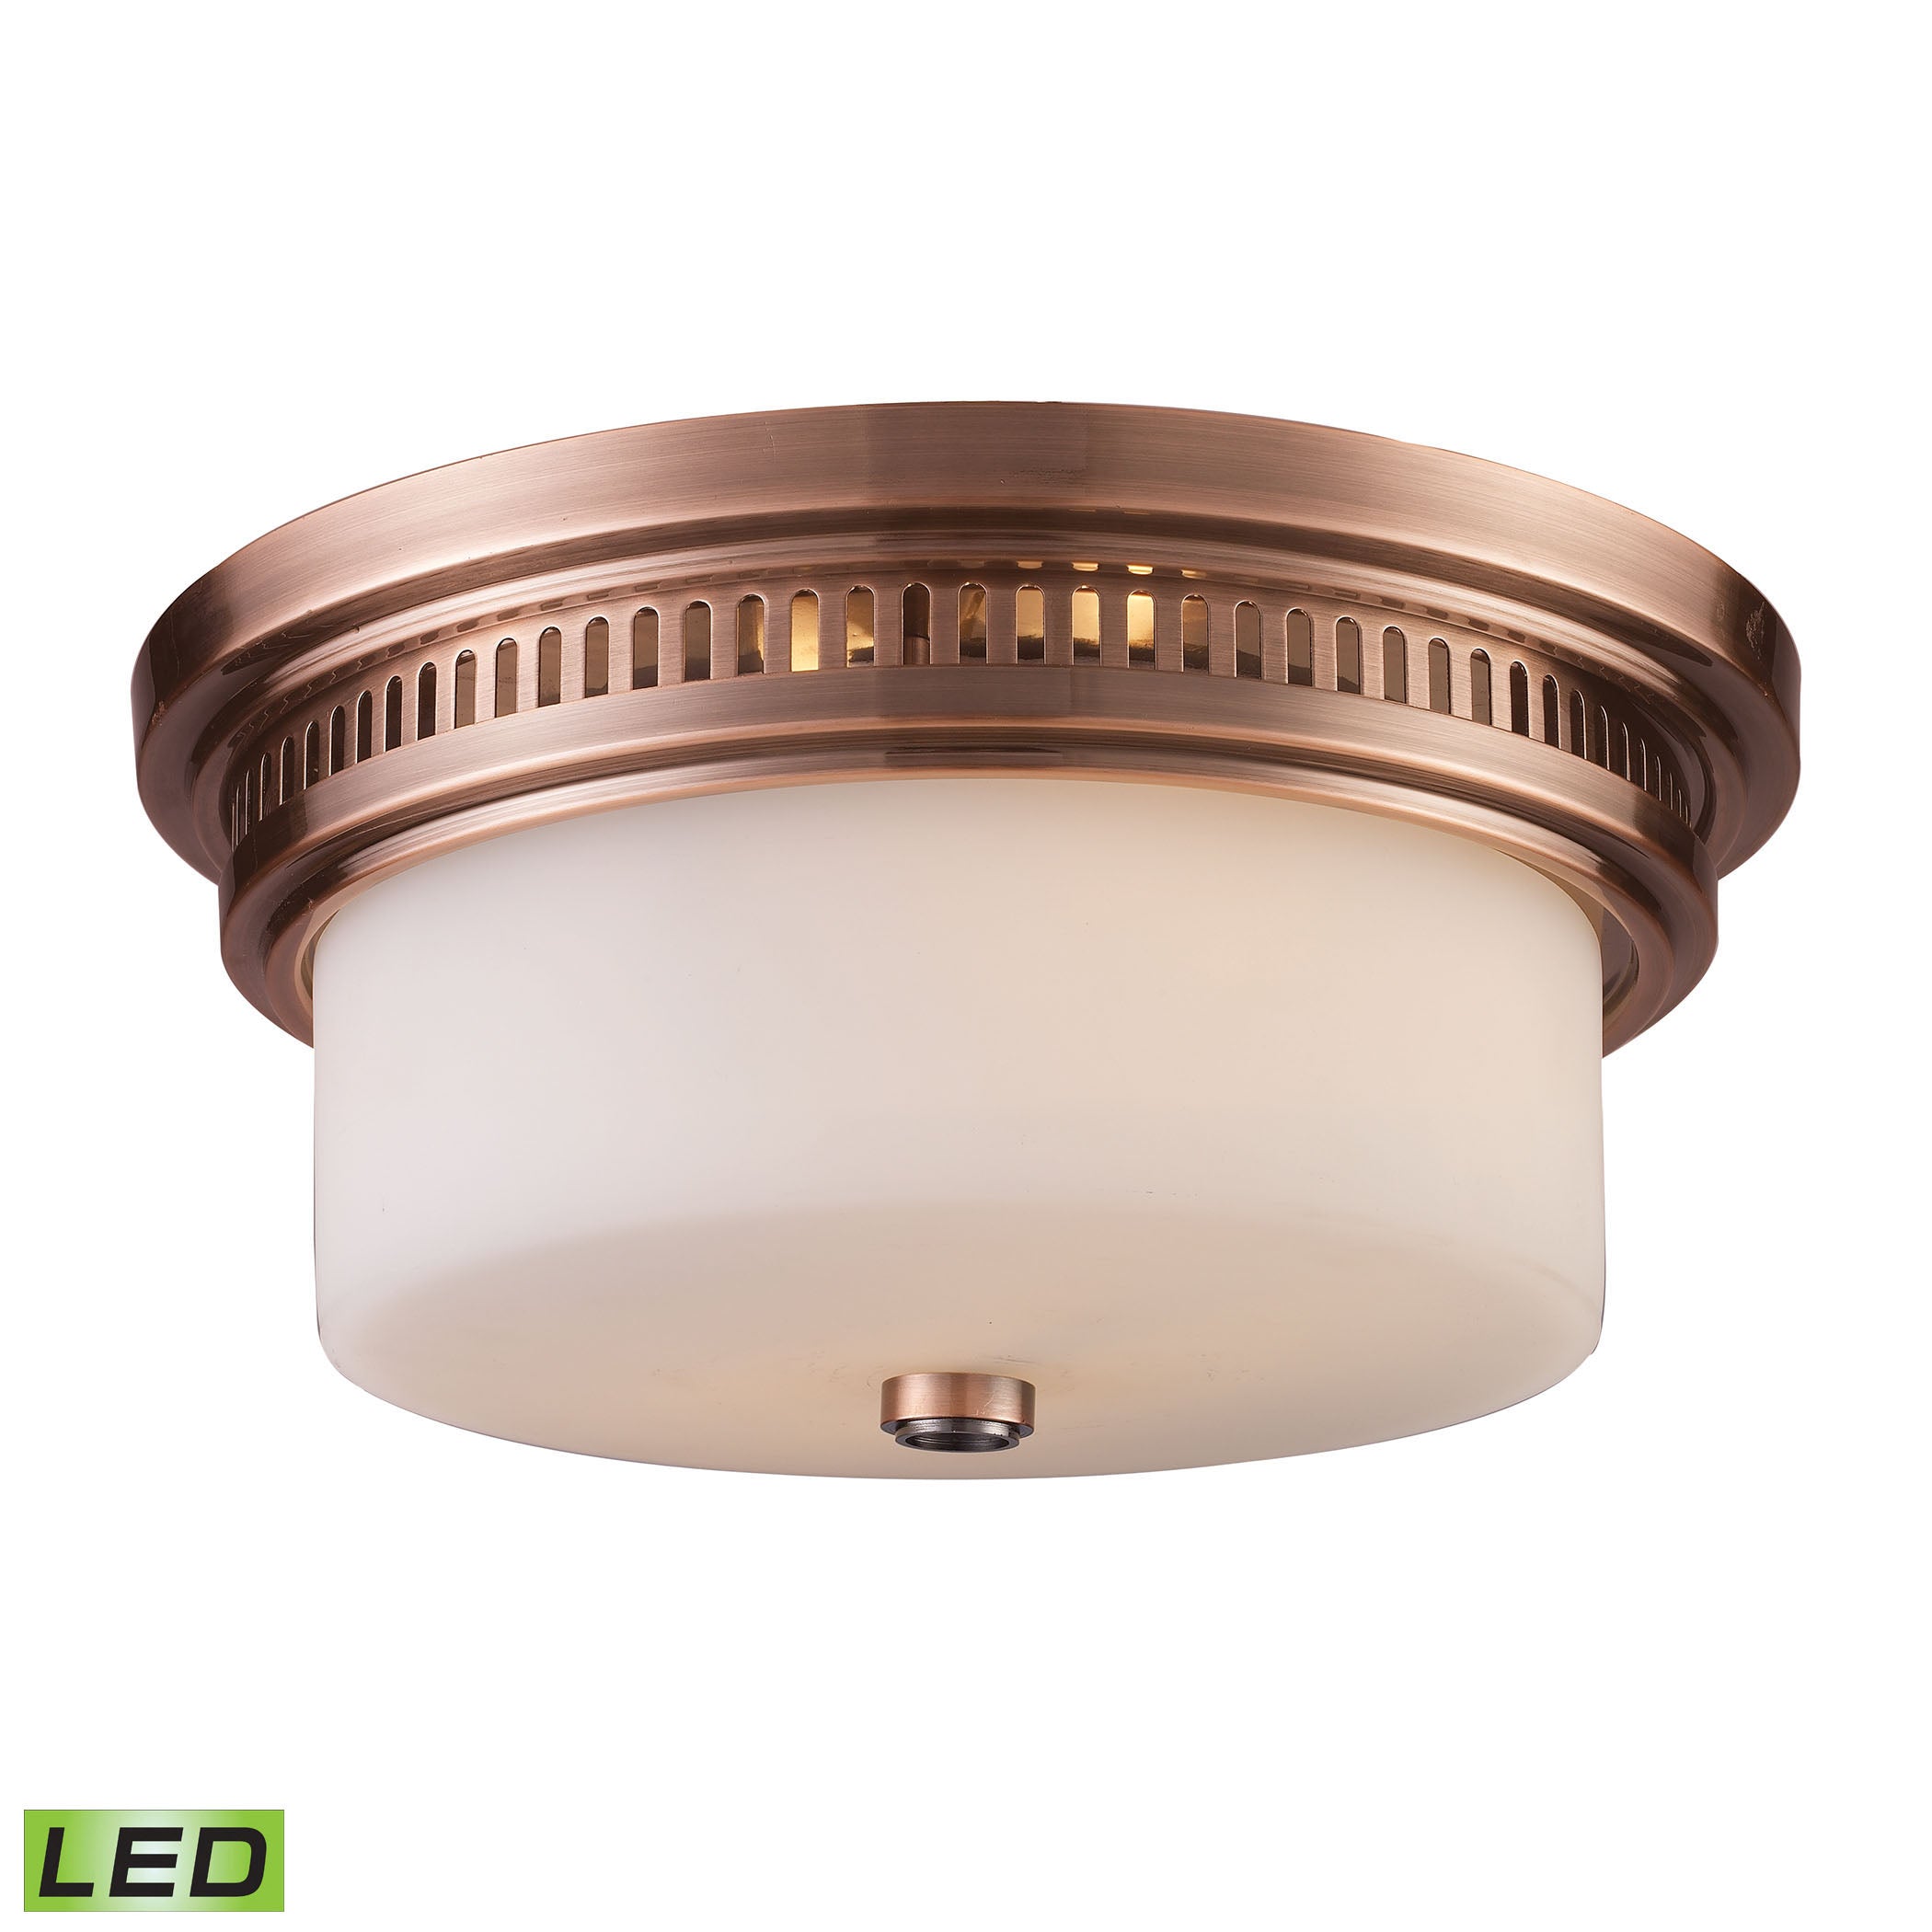 ELK Lighting 66141-2-LED Chadwick 2-Light Flush Mount in Antique Copper with White Glass - Includes LED Bulbs